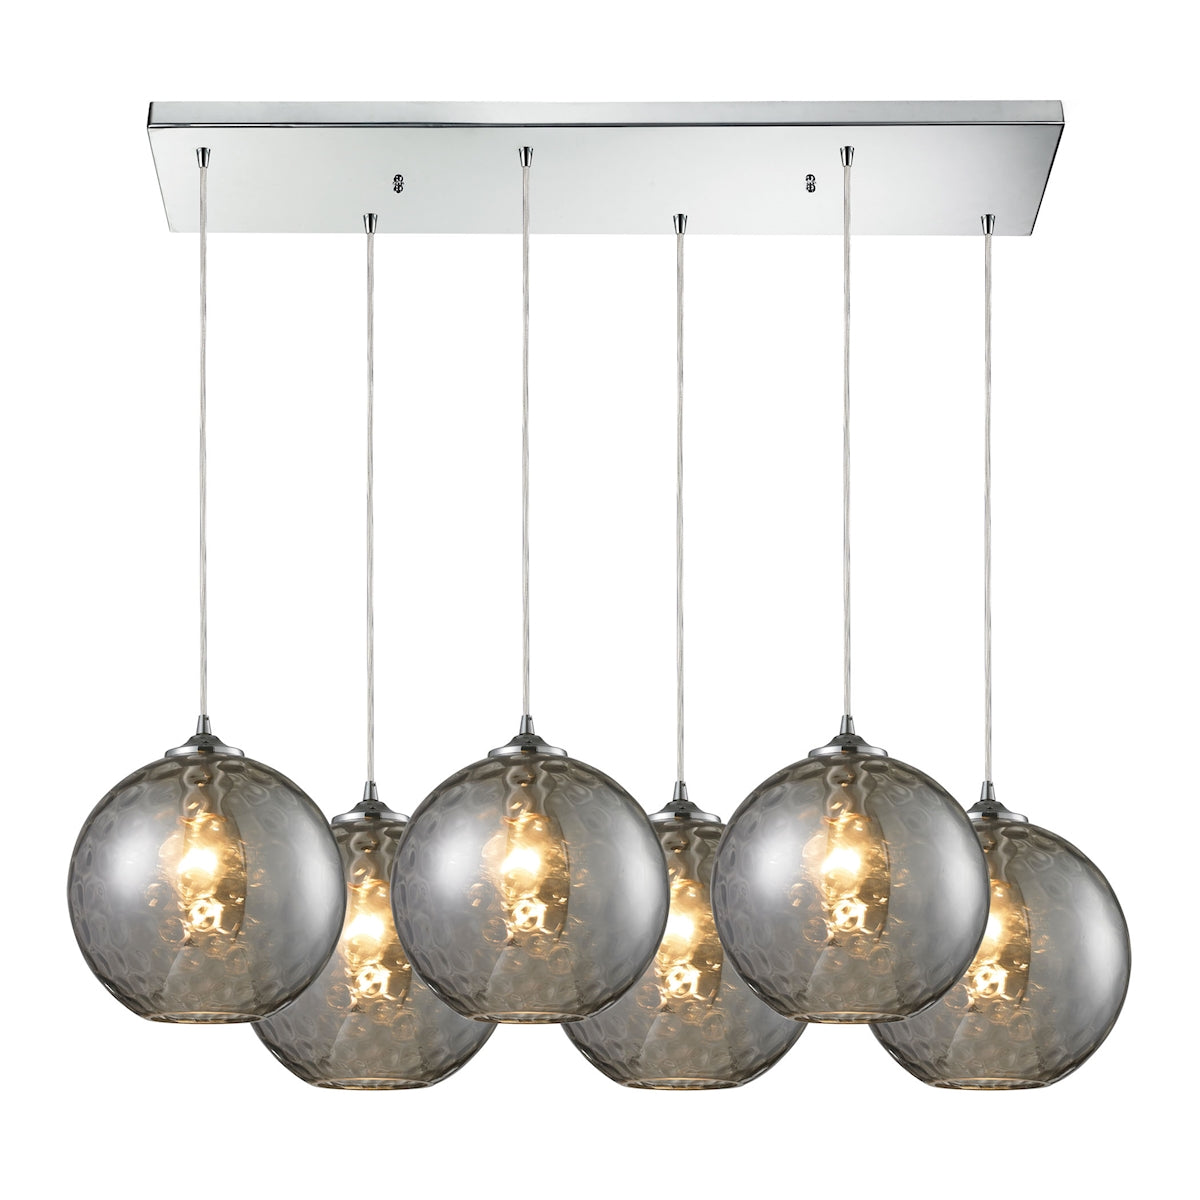 ELK Lighting 31380/6RC-SMK Watersphere 6-Light Rectangular Pendant Fixture in Chrome with Hammered Smoke Glass